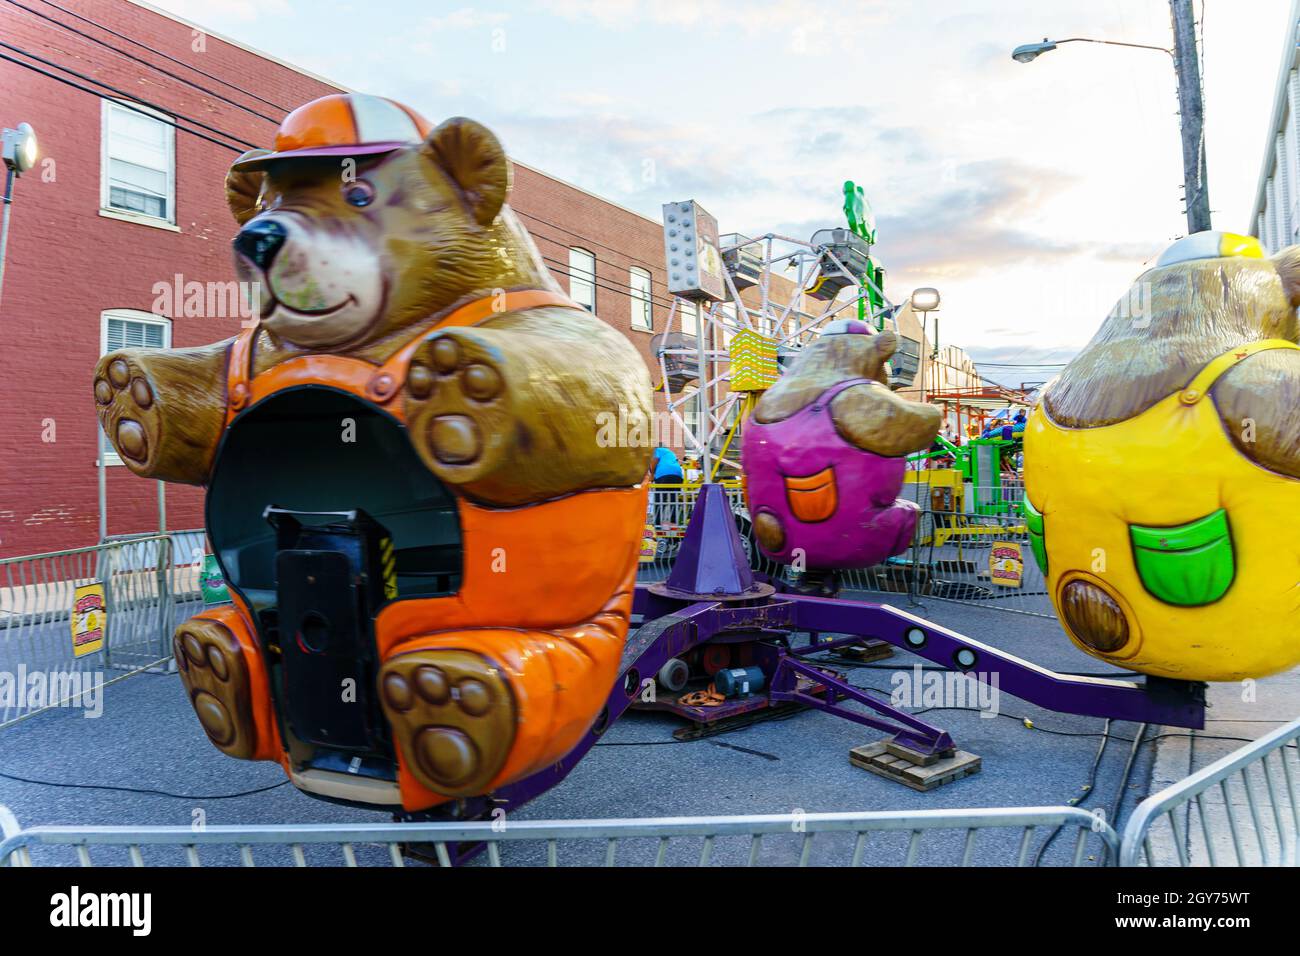 New Holland, PA, USA - September 30, 2021: Kiddie rides for smaller children were at the annual community street fair in the small community in Lancas Stock Photo